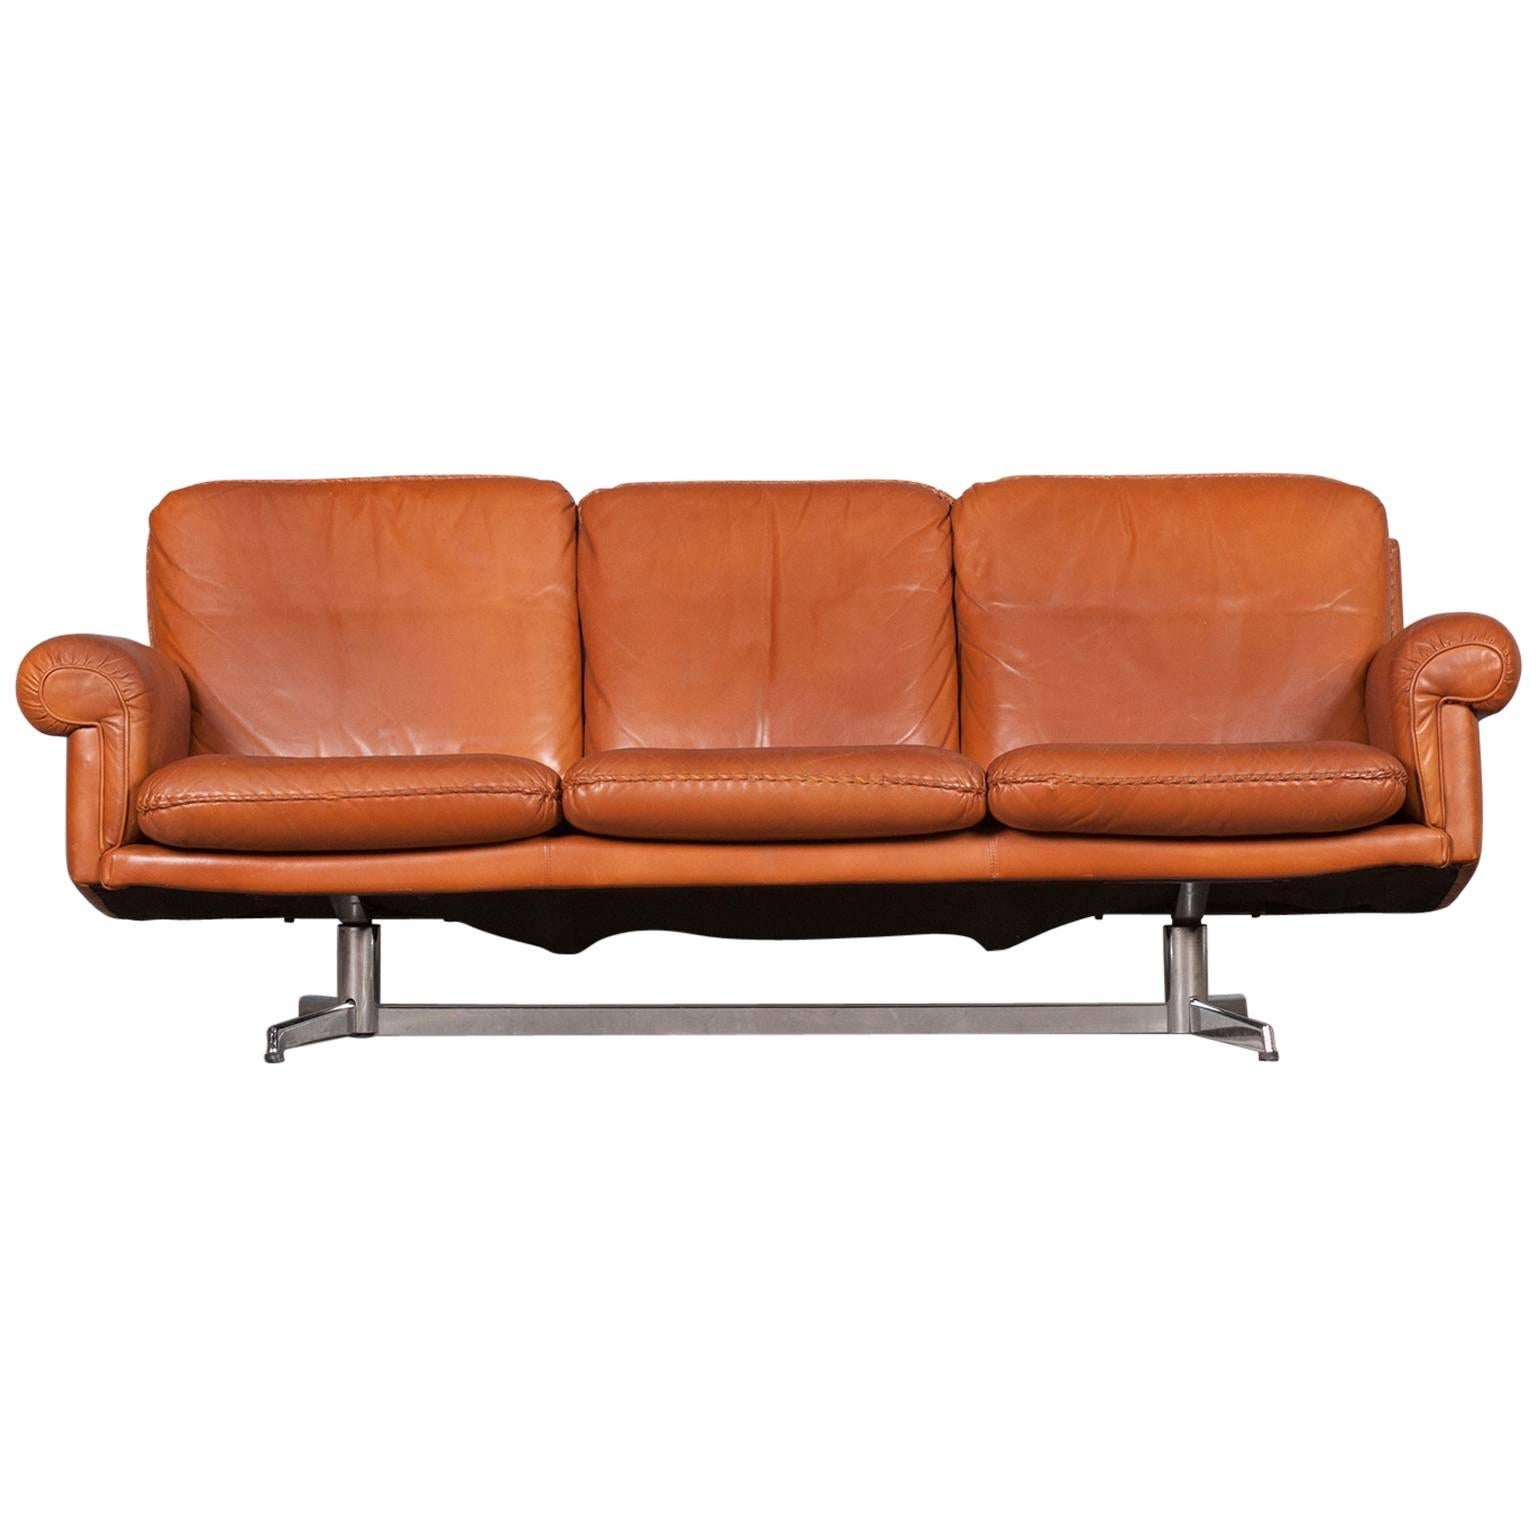 Swiss Three-Seater Sofa in Caramel Leather with Steel Base by De Sede, 1960s For Sale